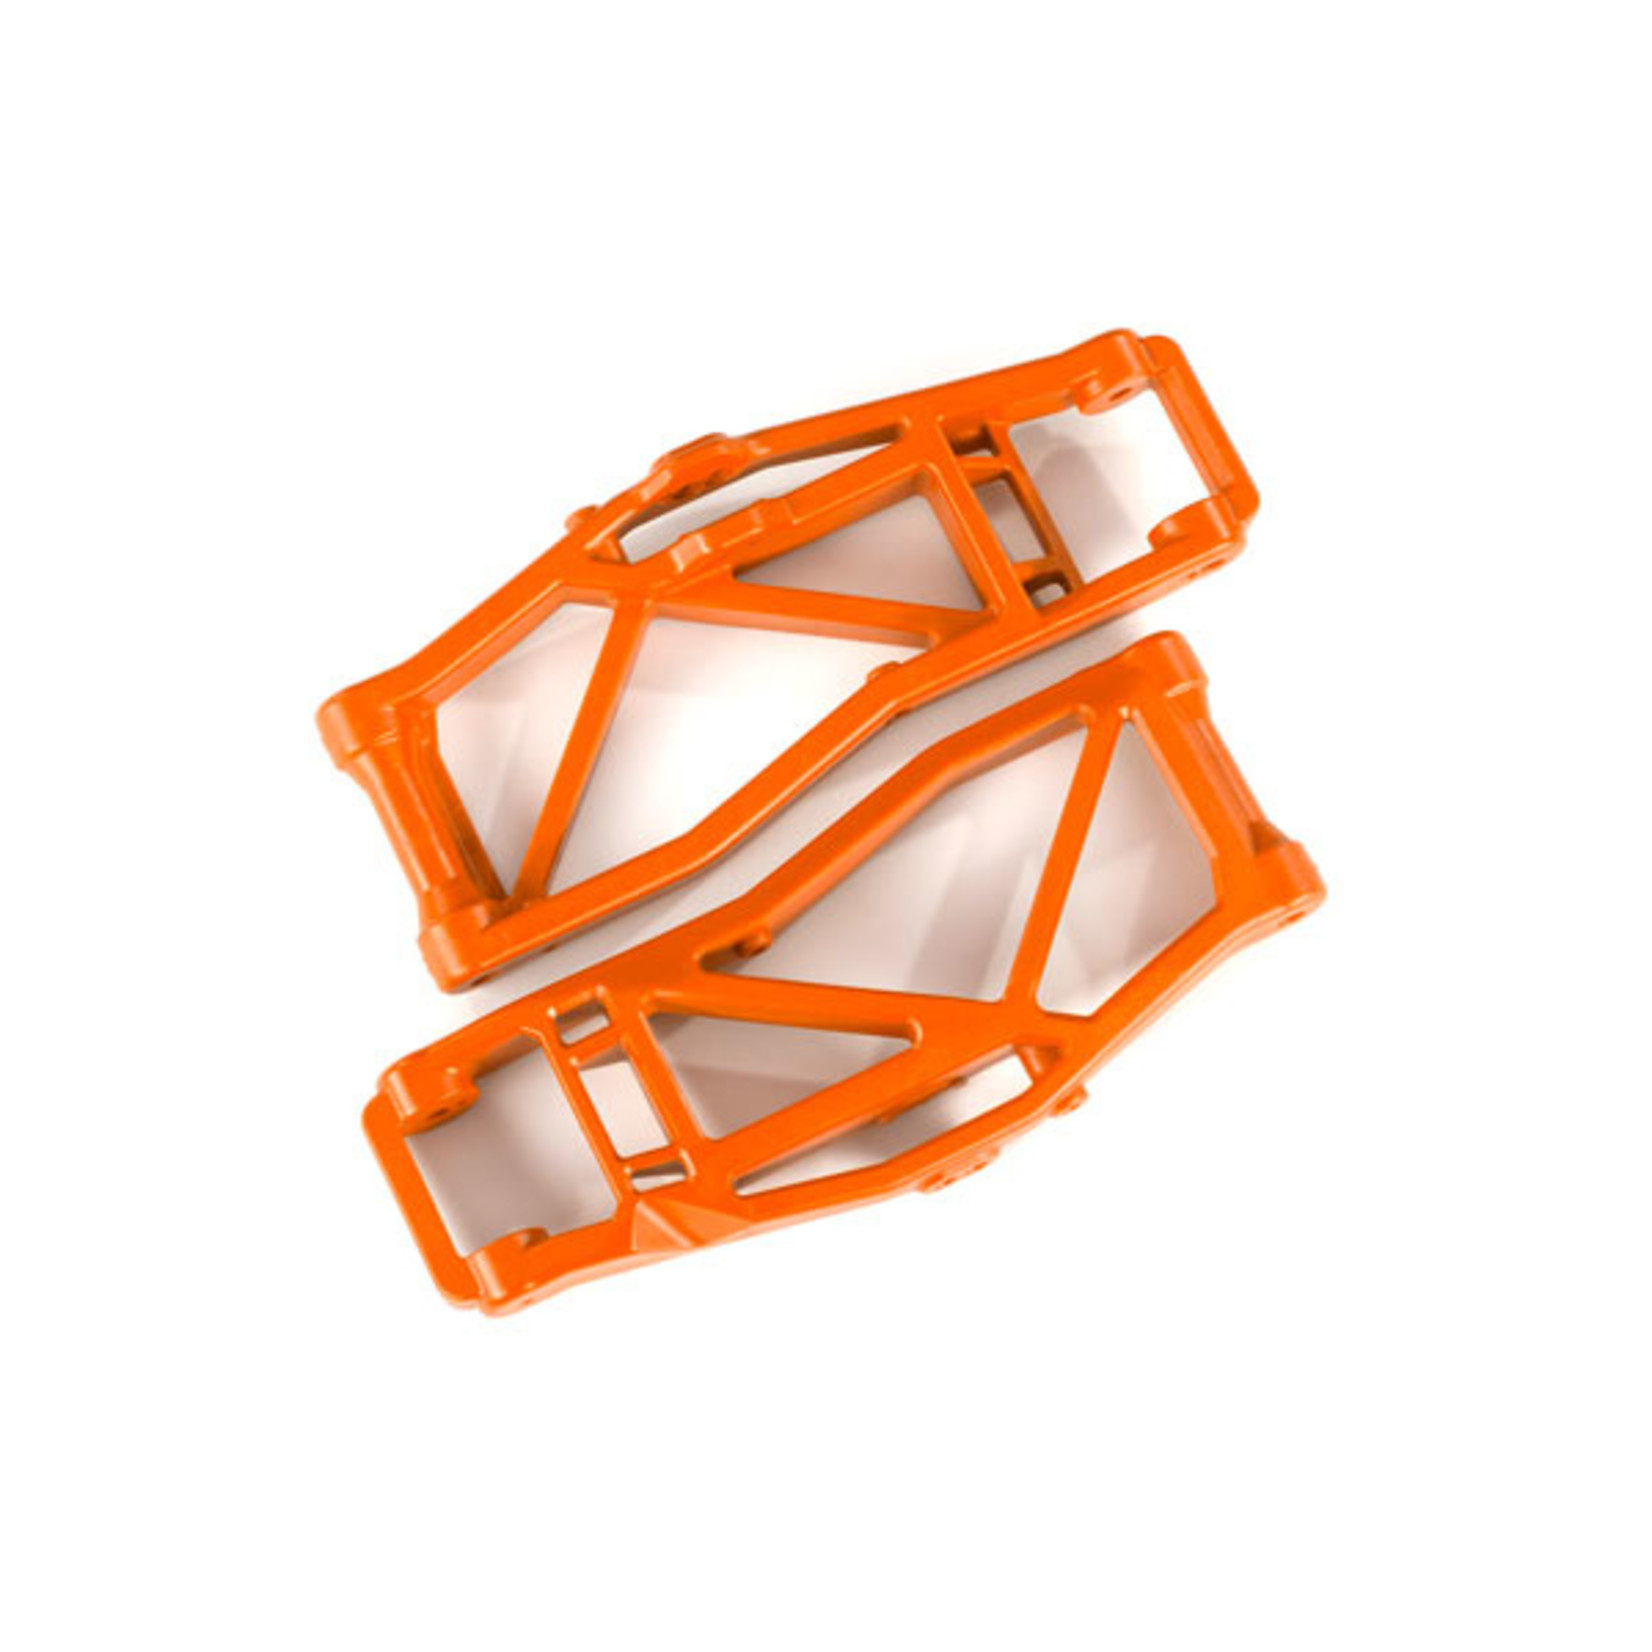 Traxxas 8999T - Suspension arms, lower, orange (left and r